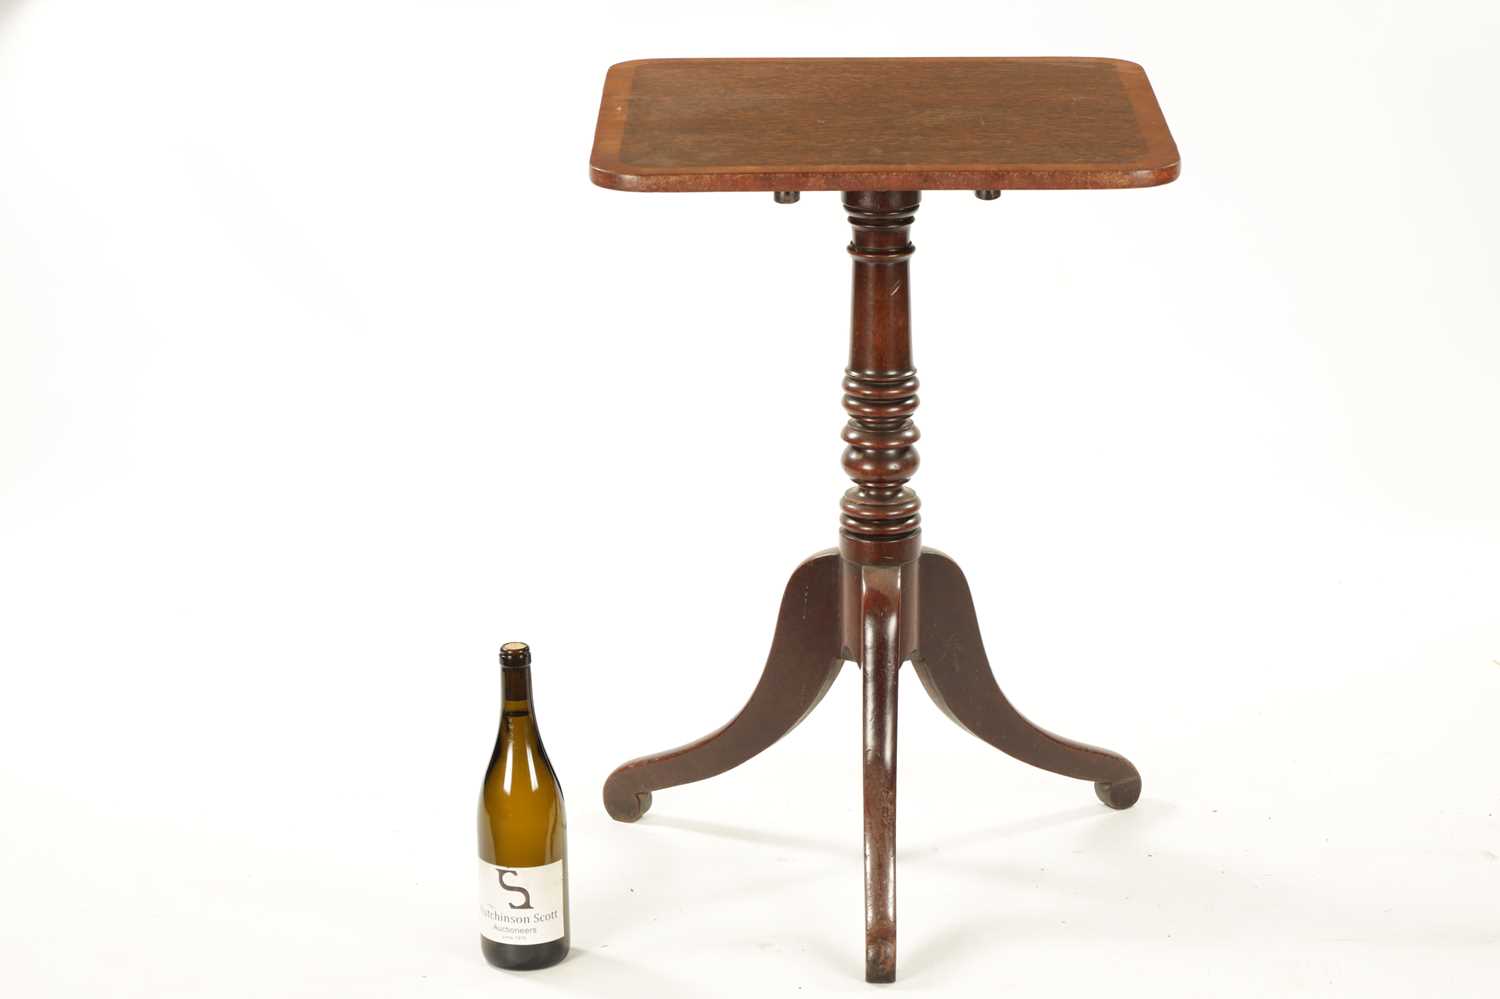 A REGENCY TRIPOD TABLE WITH PALM WOOD TOP AND MAHOGANY BASE - Image 5 of 5